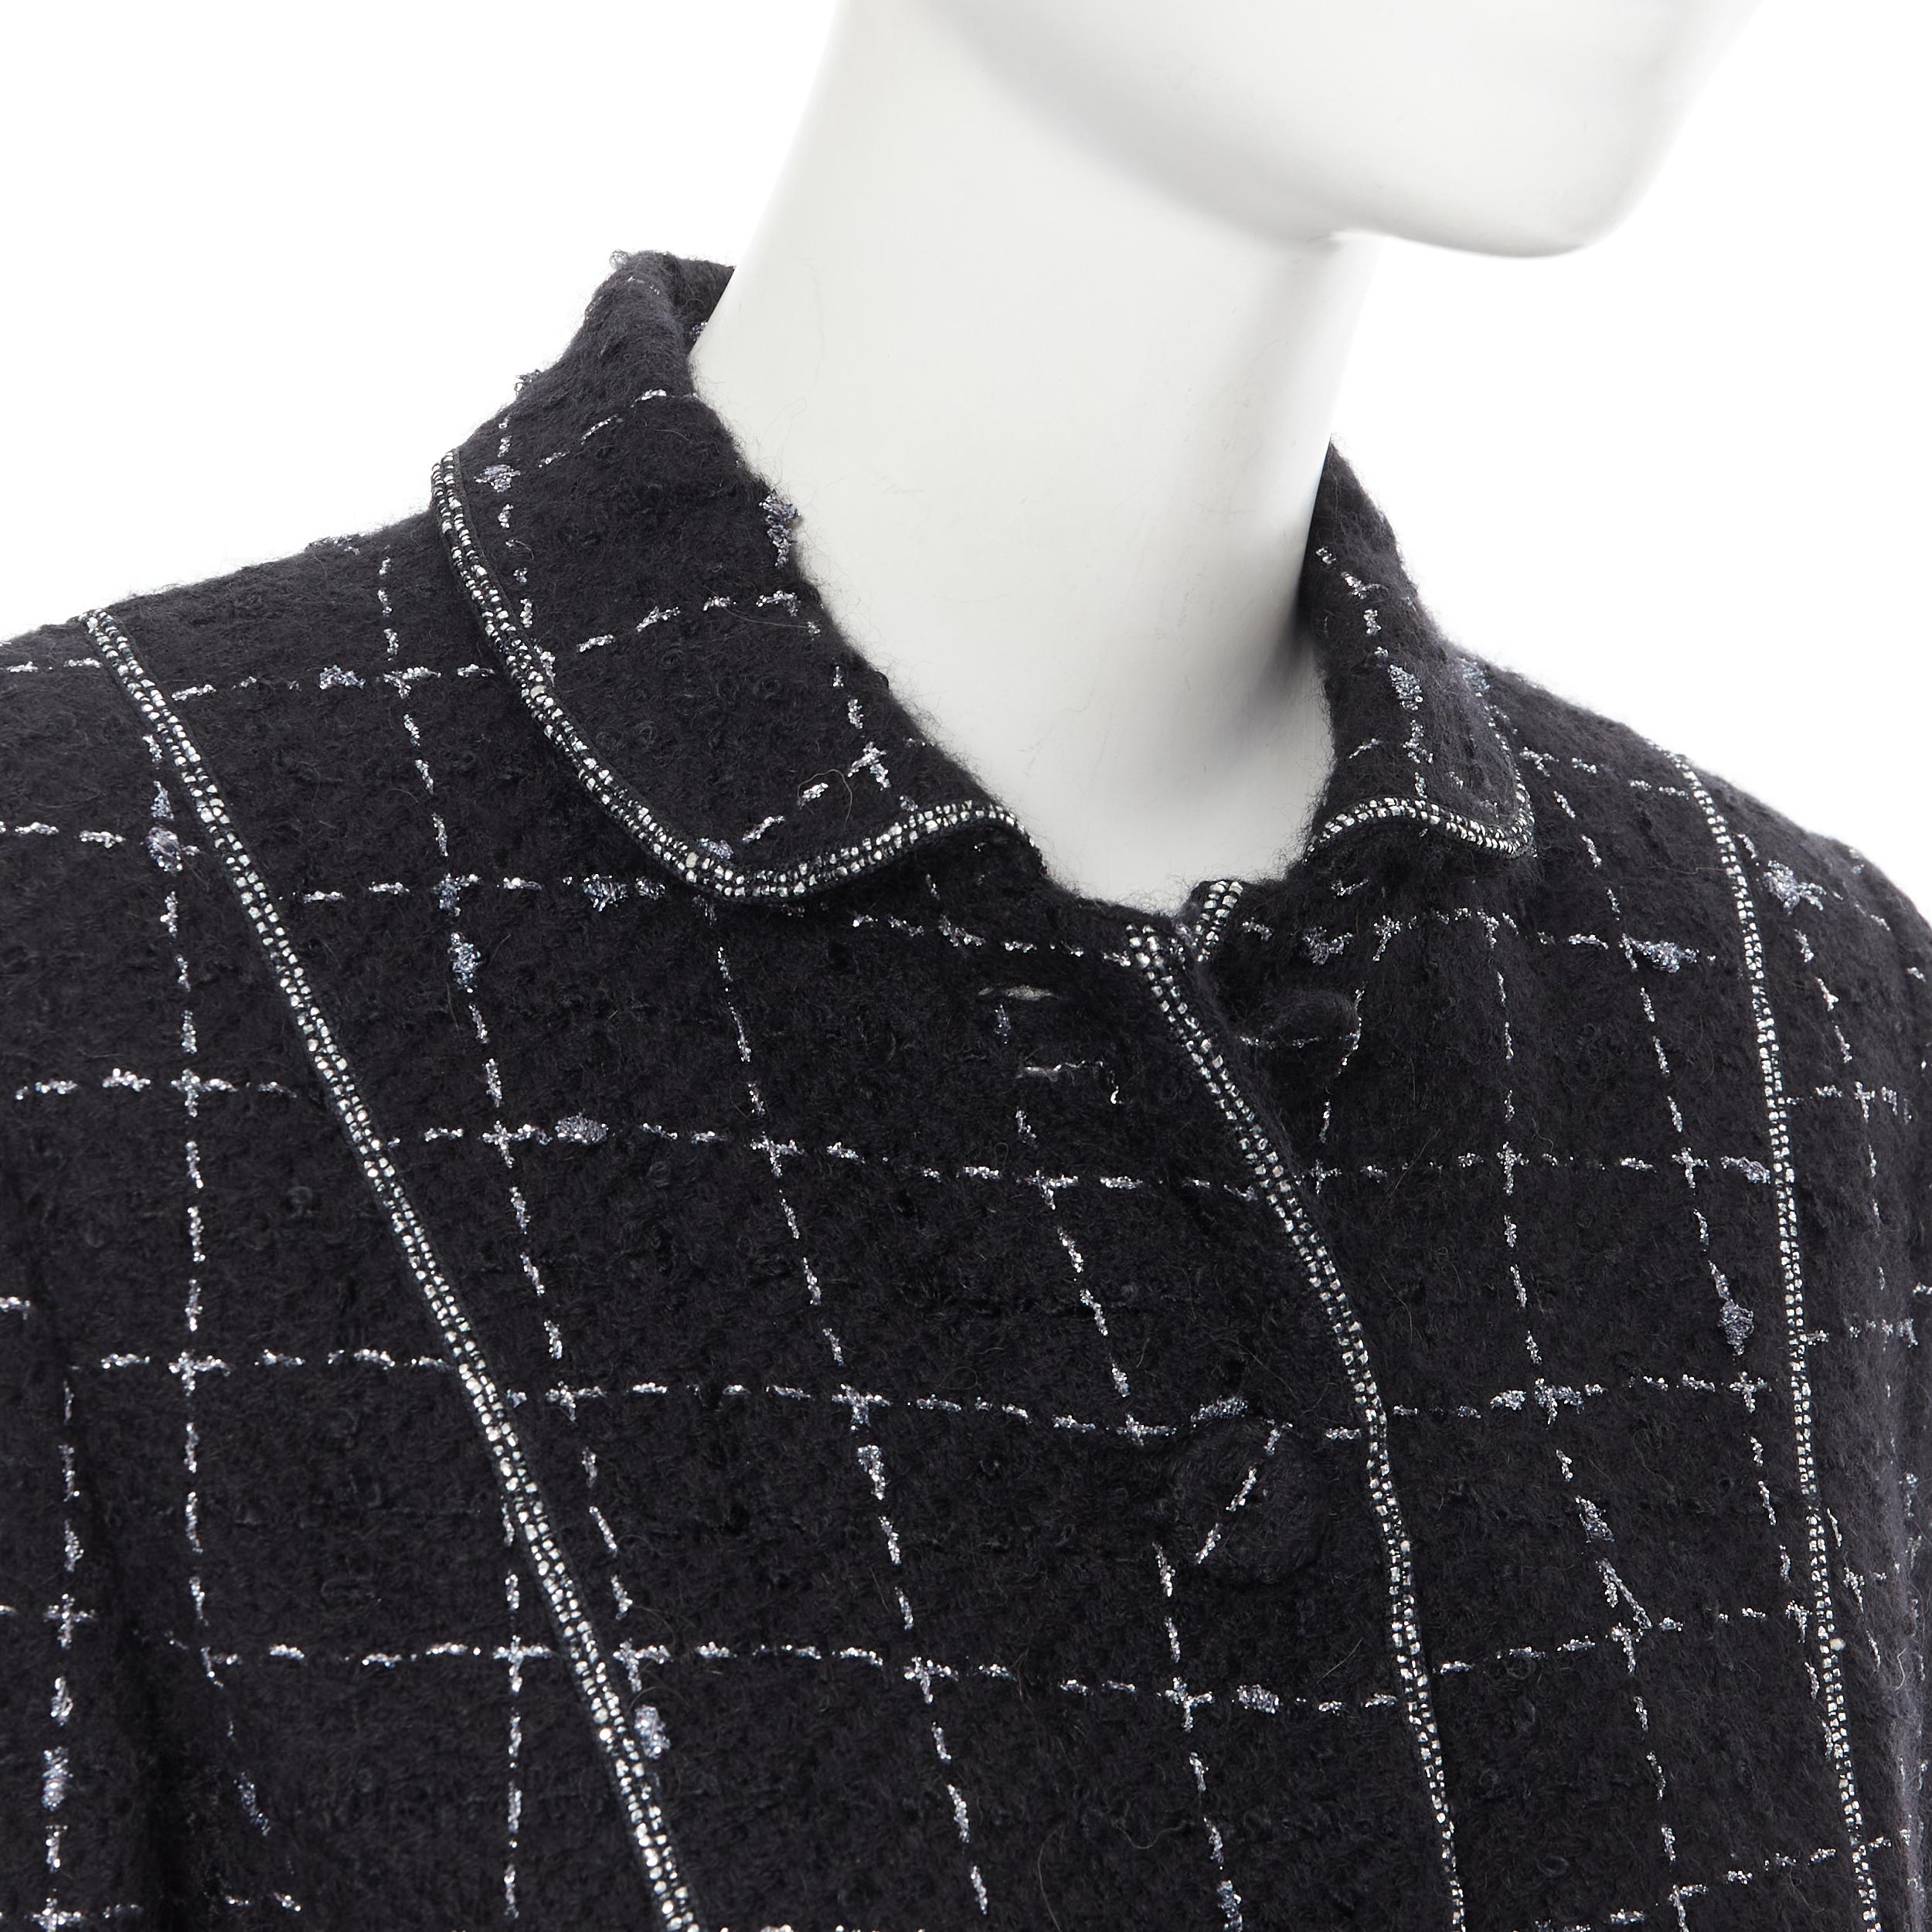 LUISA BECCARIA black silver check embellished tweed jacket skirt set IT44 M 
Reference: GIYG/A00043 
Brand: Luisa Beccaria 
Material: Wool 
Color: Black 
Pattern: Check 
Closure: Button 
Extra Detail: Silver bead embellishment. Fabric wrapped